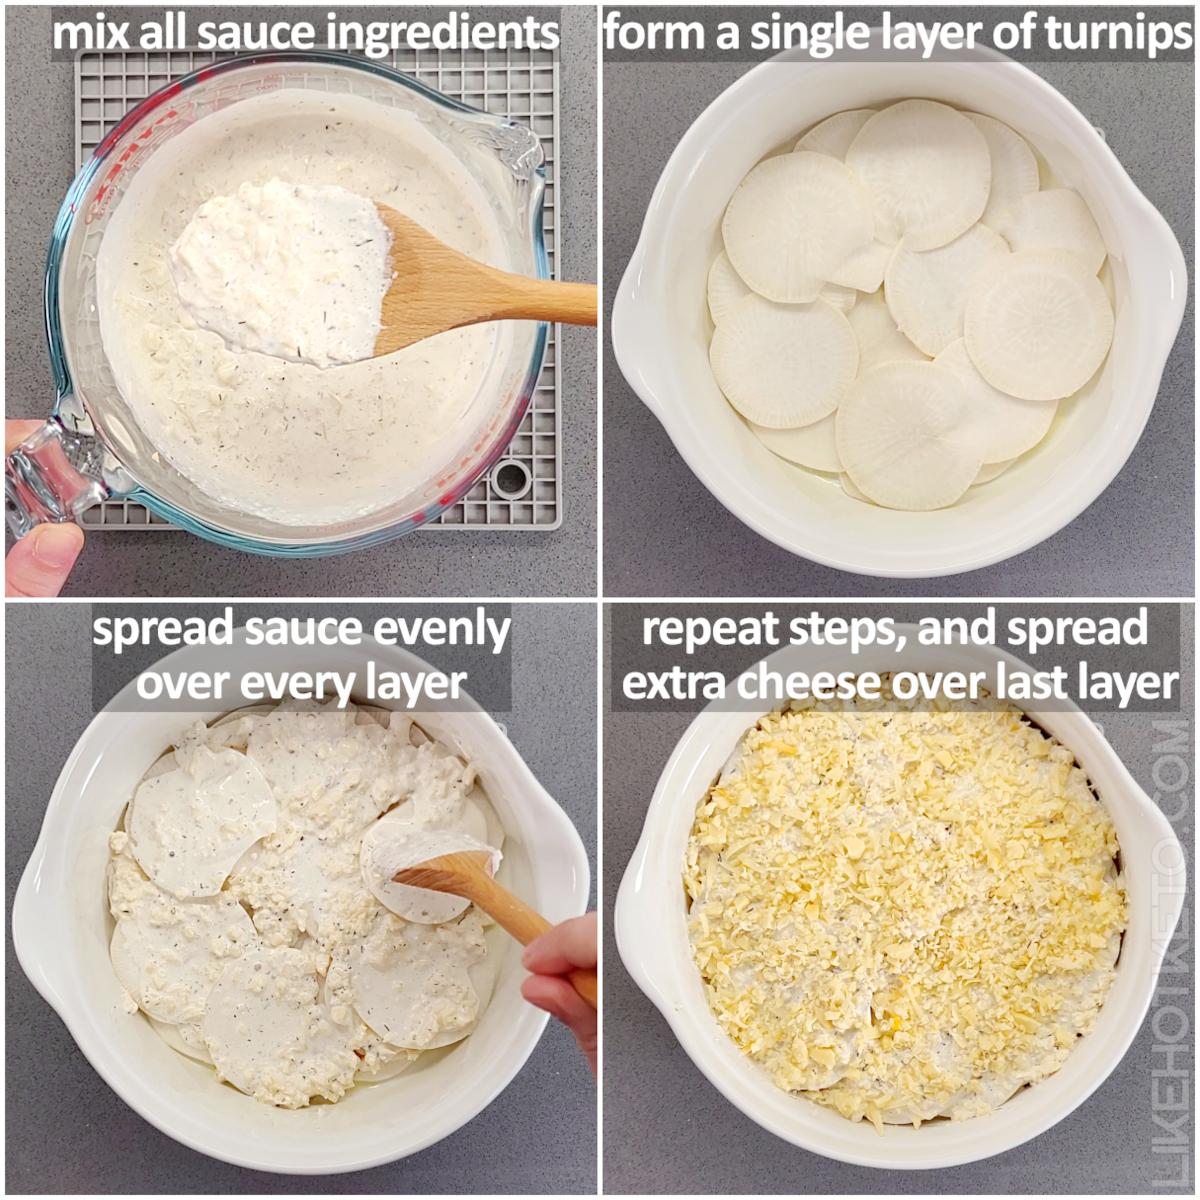 Step by step of making the keto turnip gratin: mixing the creamy sauce, and layering with the sliced turnips and cheese.